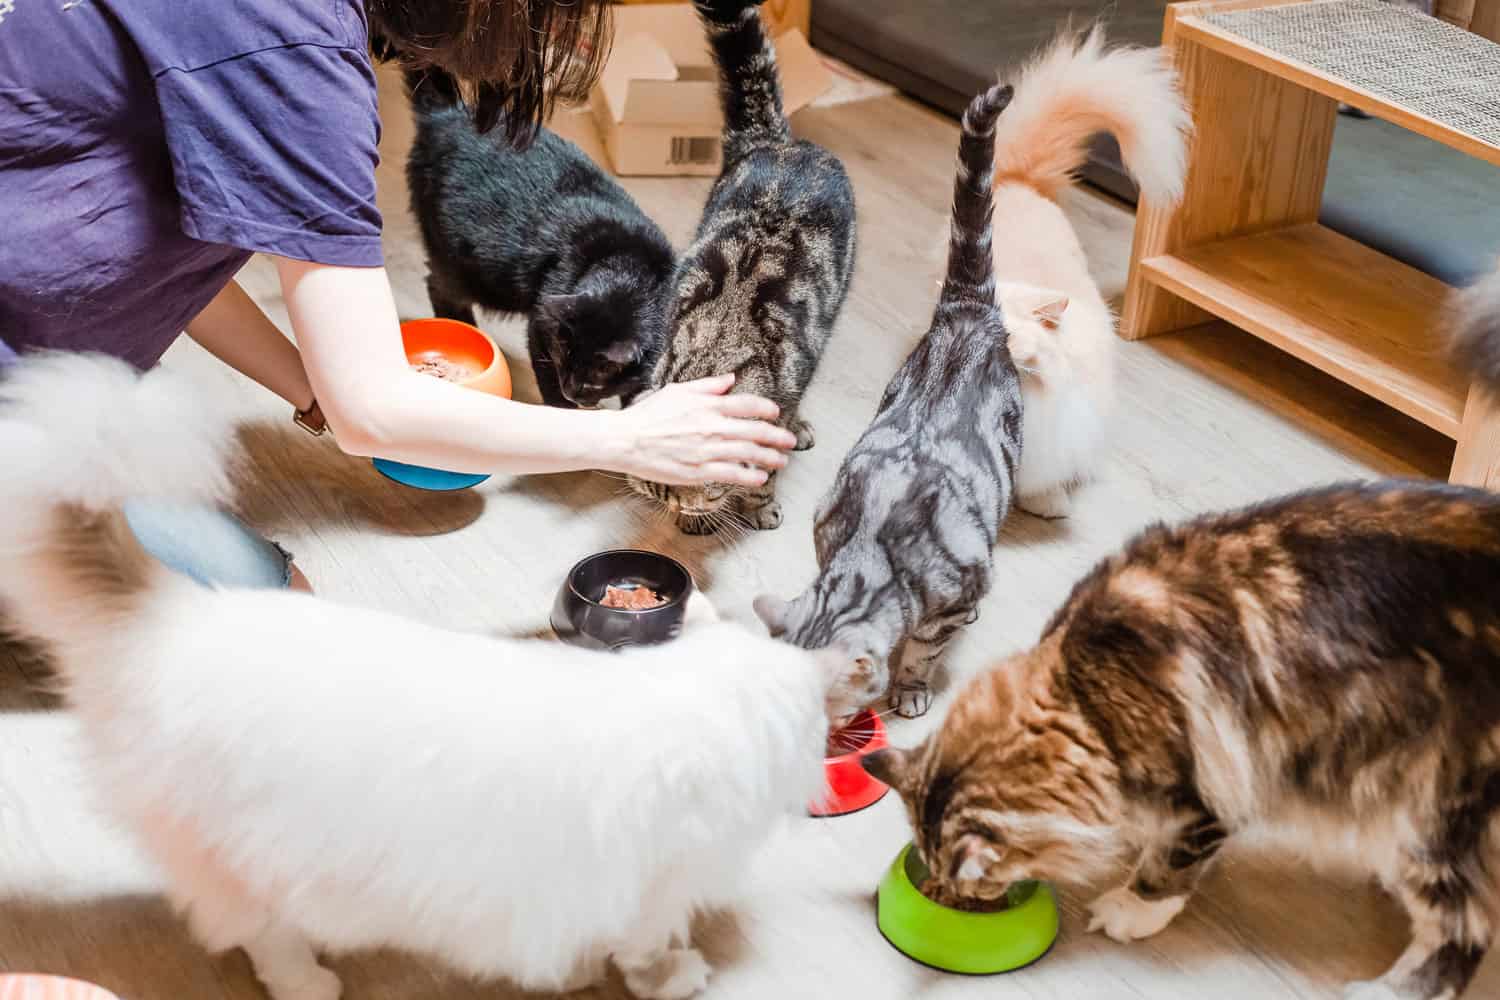 Cats eating their food in the house